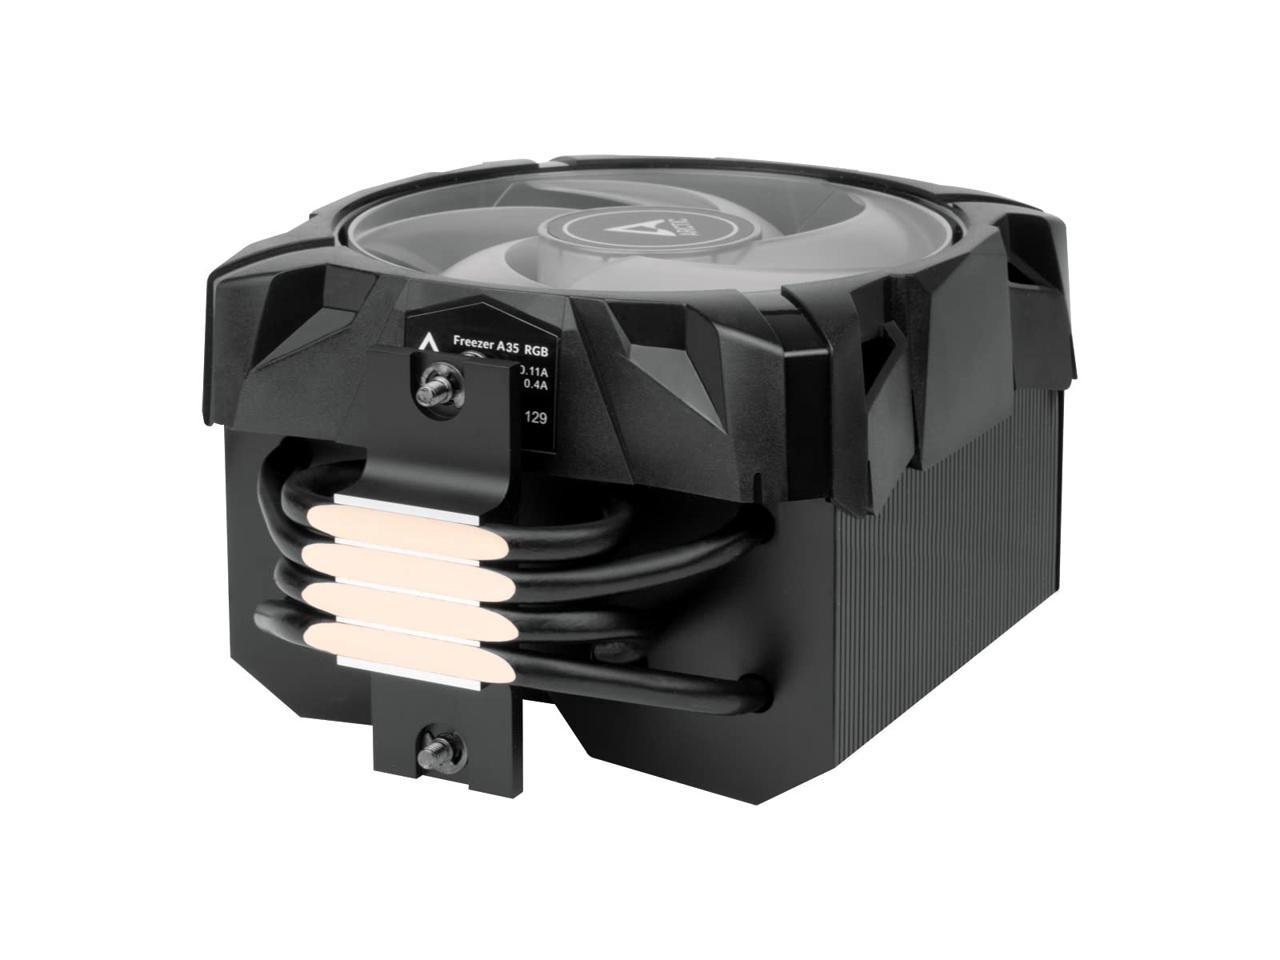 ARCTIC Freezer A35 RGB - Single Tower CPU Cooler with RGB, AMD Specific, Pressure Optimized 120 mm P-Fan, 200-1700 RPM, 4 Heat Pipes, incl. MX-5 Thermal Paste - Black